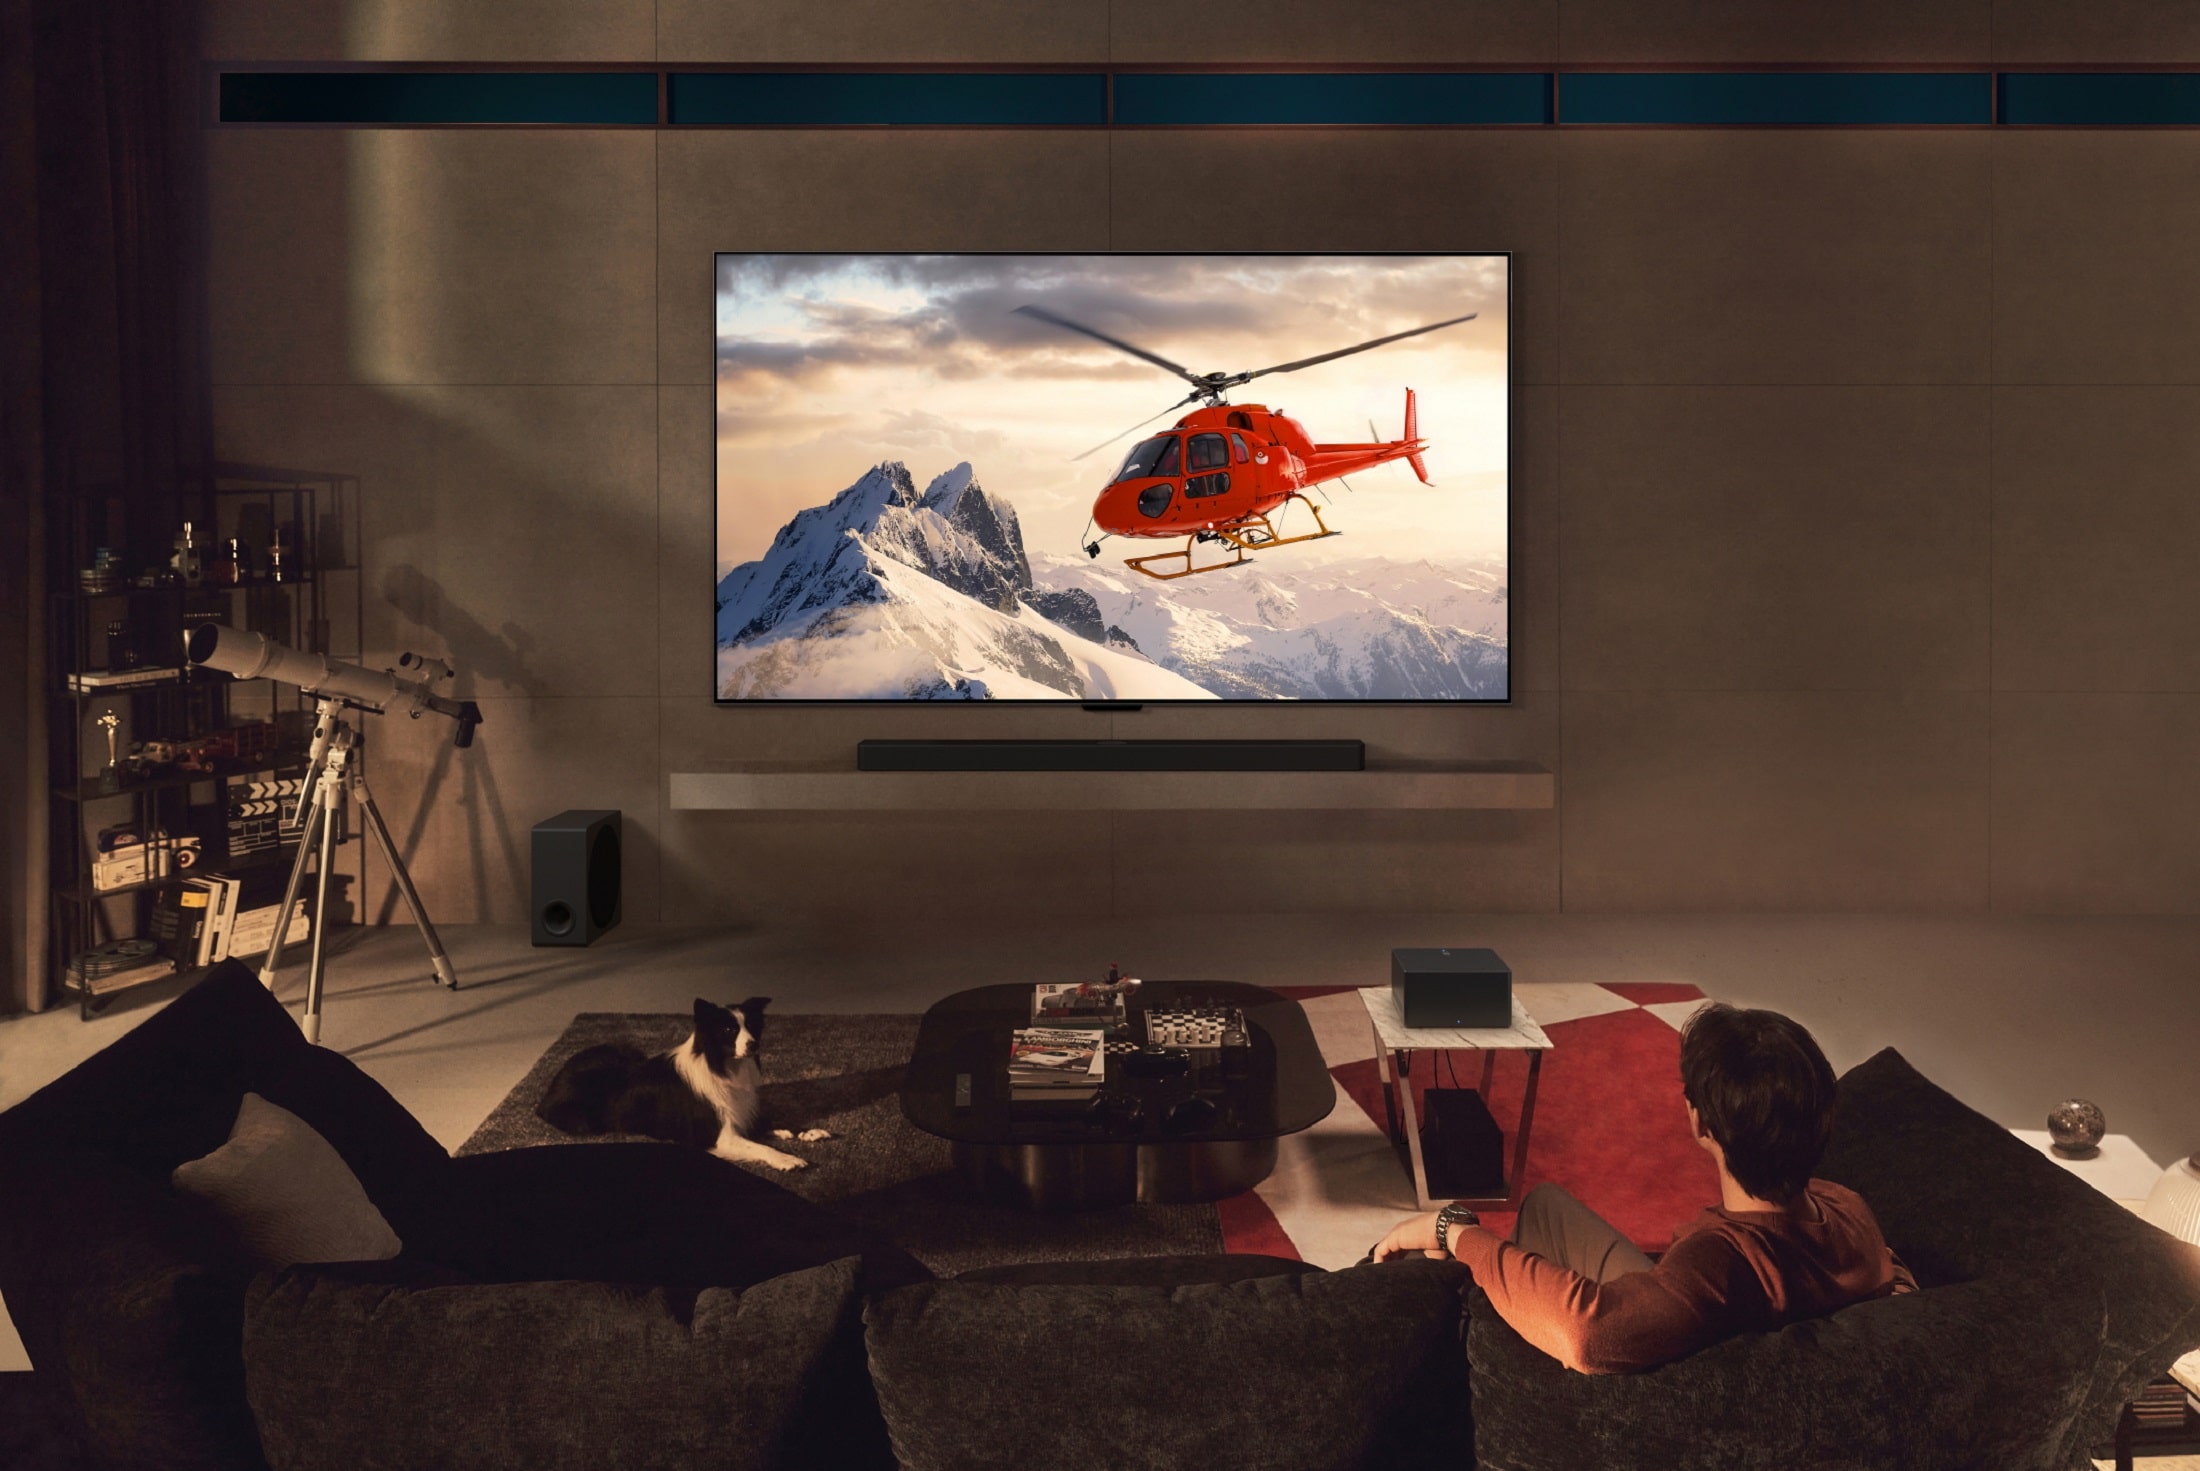 LG OLED TV with a helipcotper on the screen in a dark living room